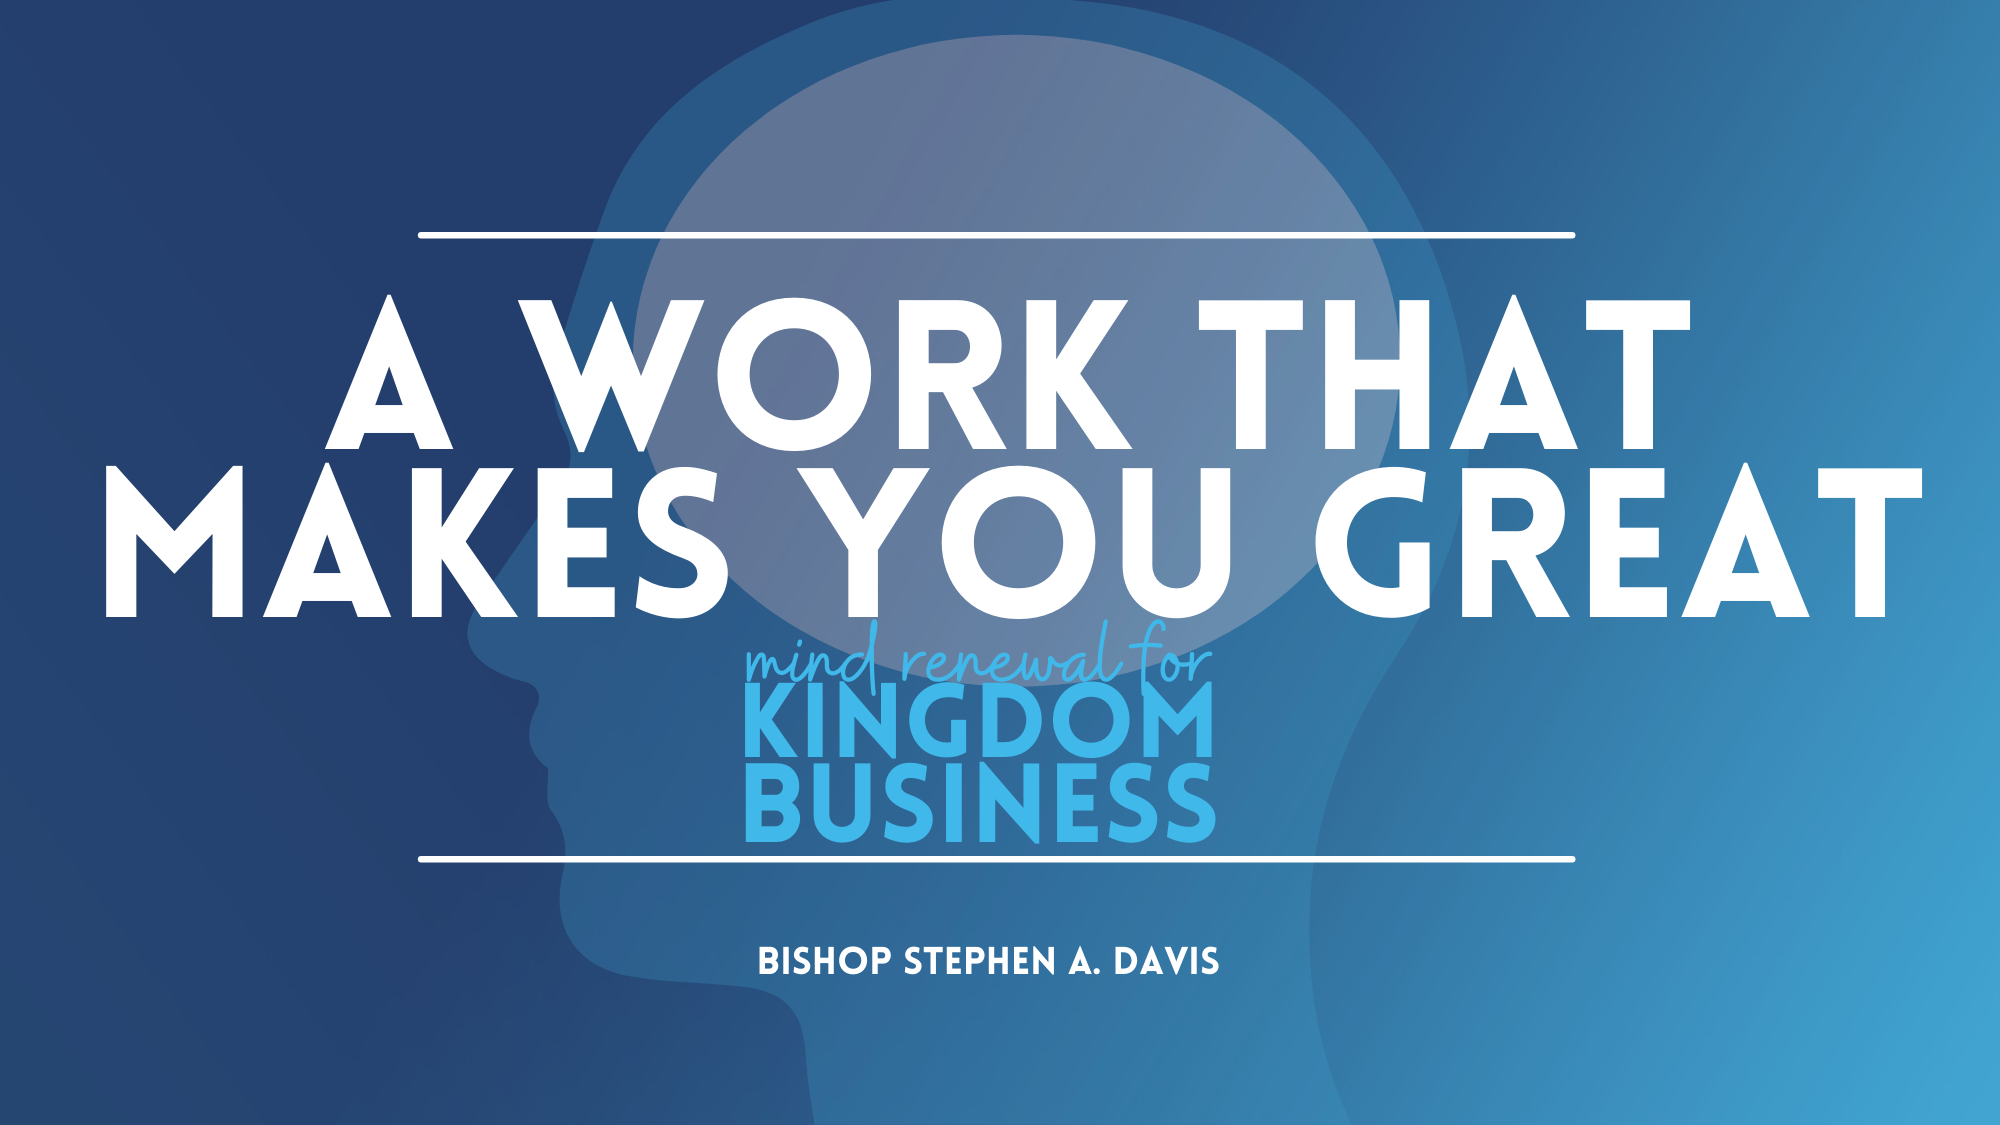 A Work That Makes You Great – Bishop Stephen A. Davis